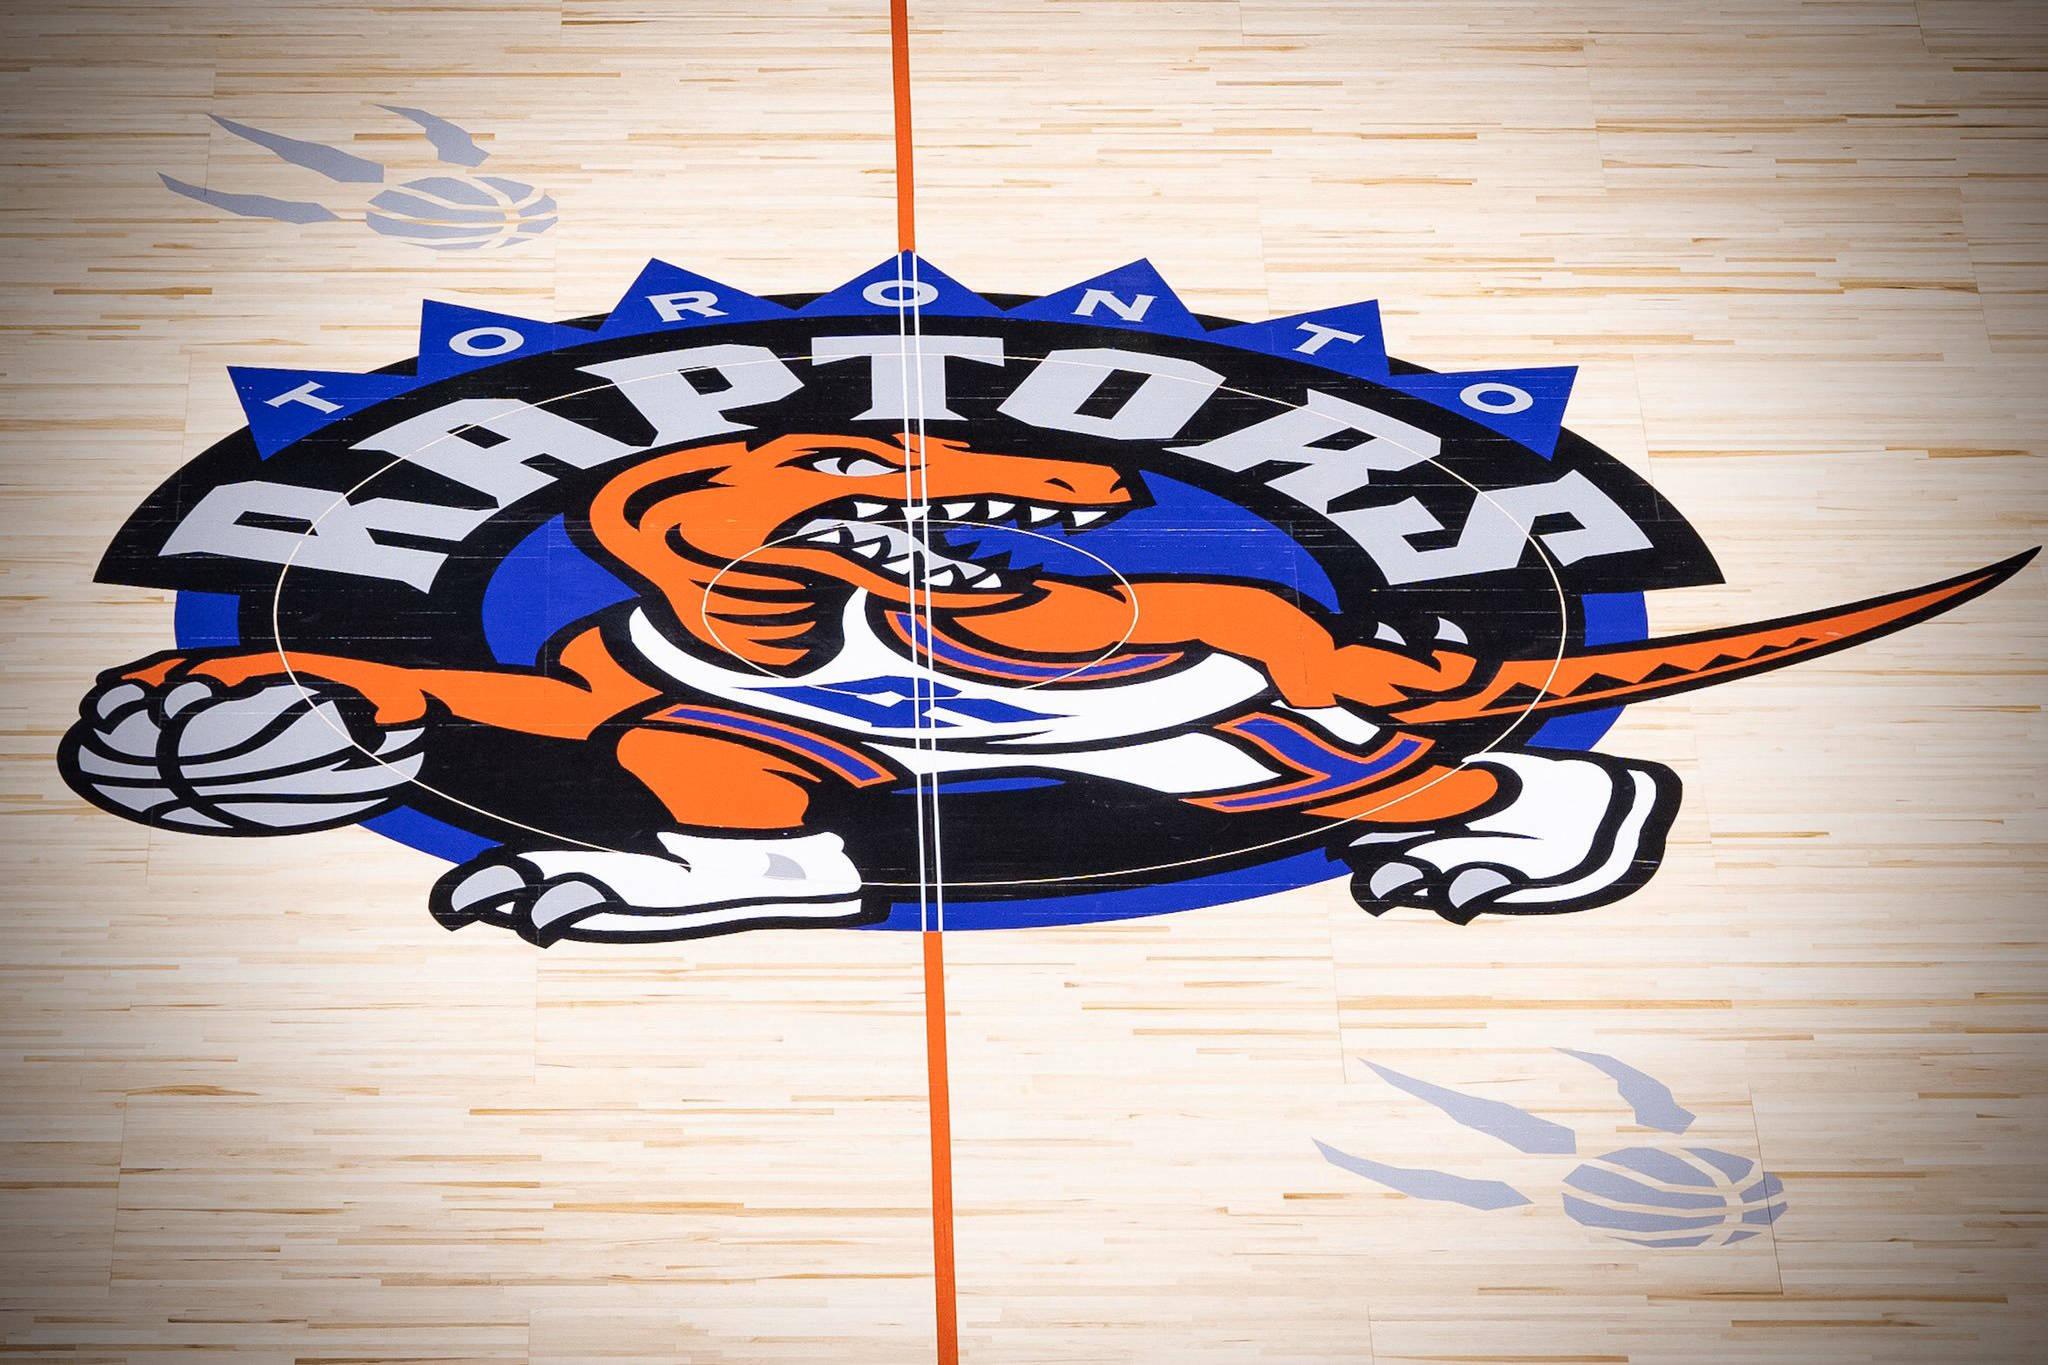 This is what the Raptors' new throwback court looks like at